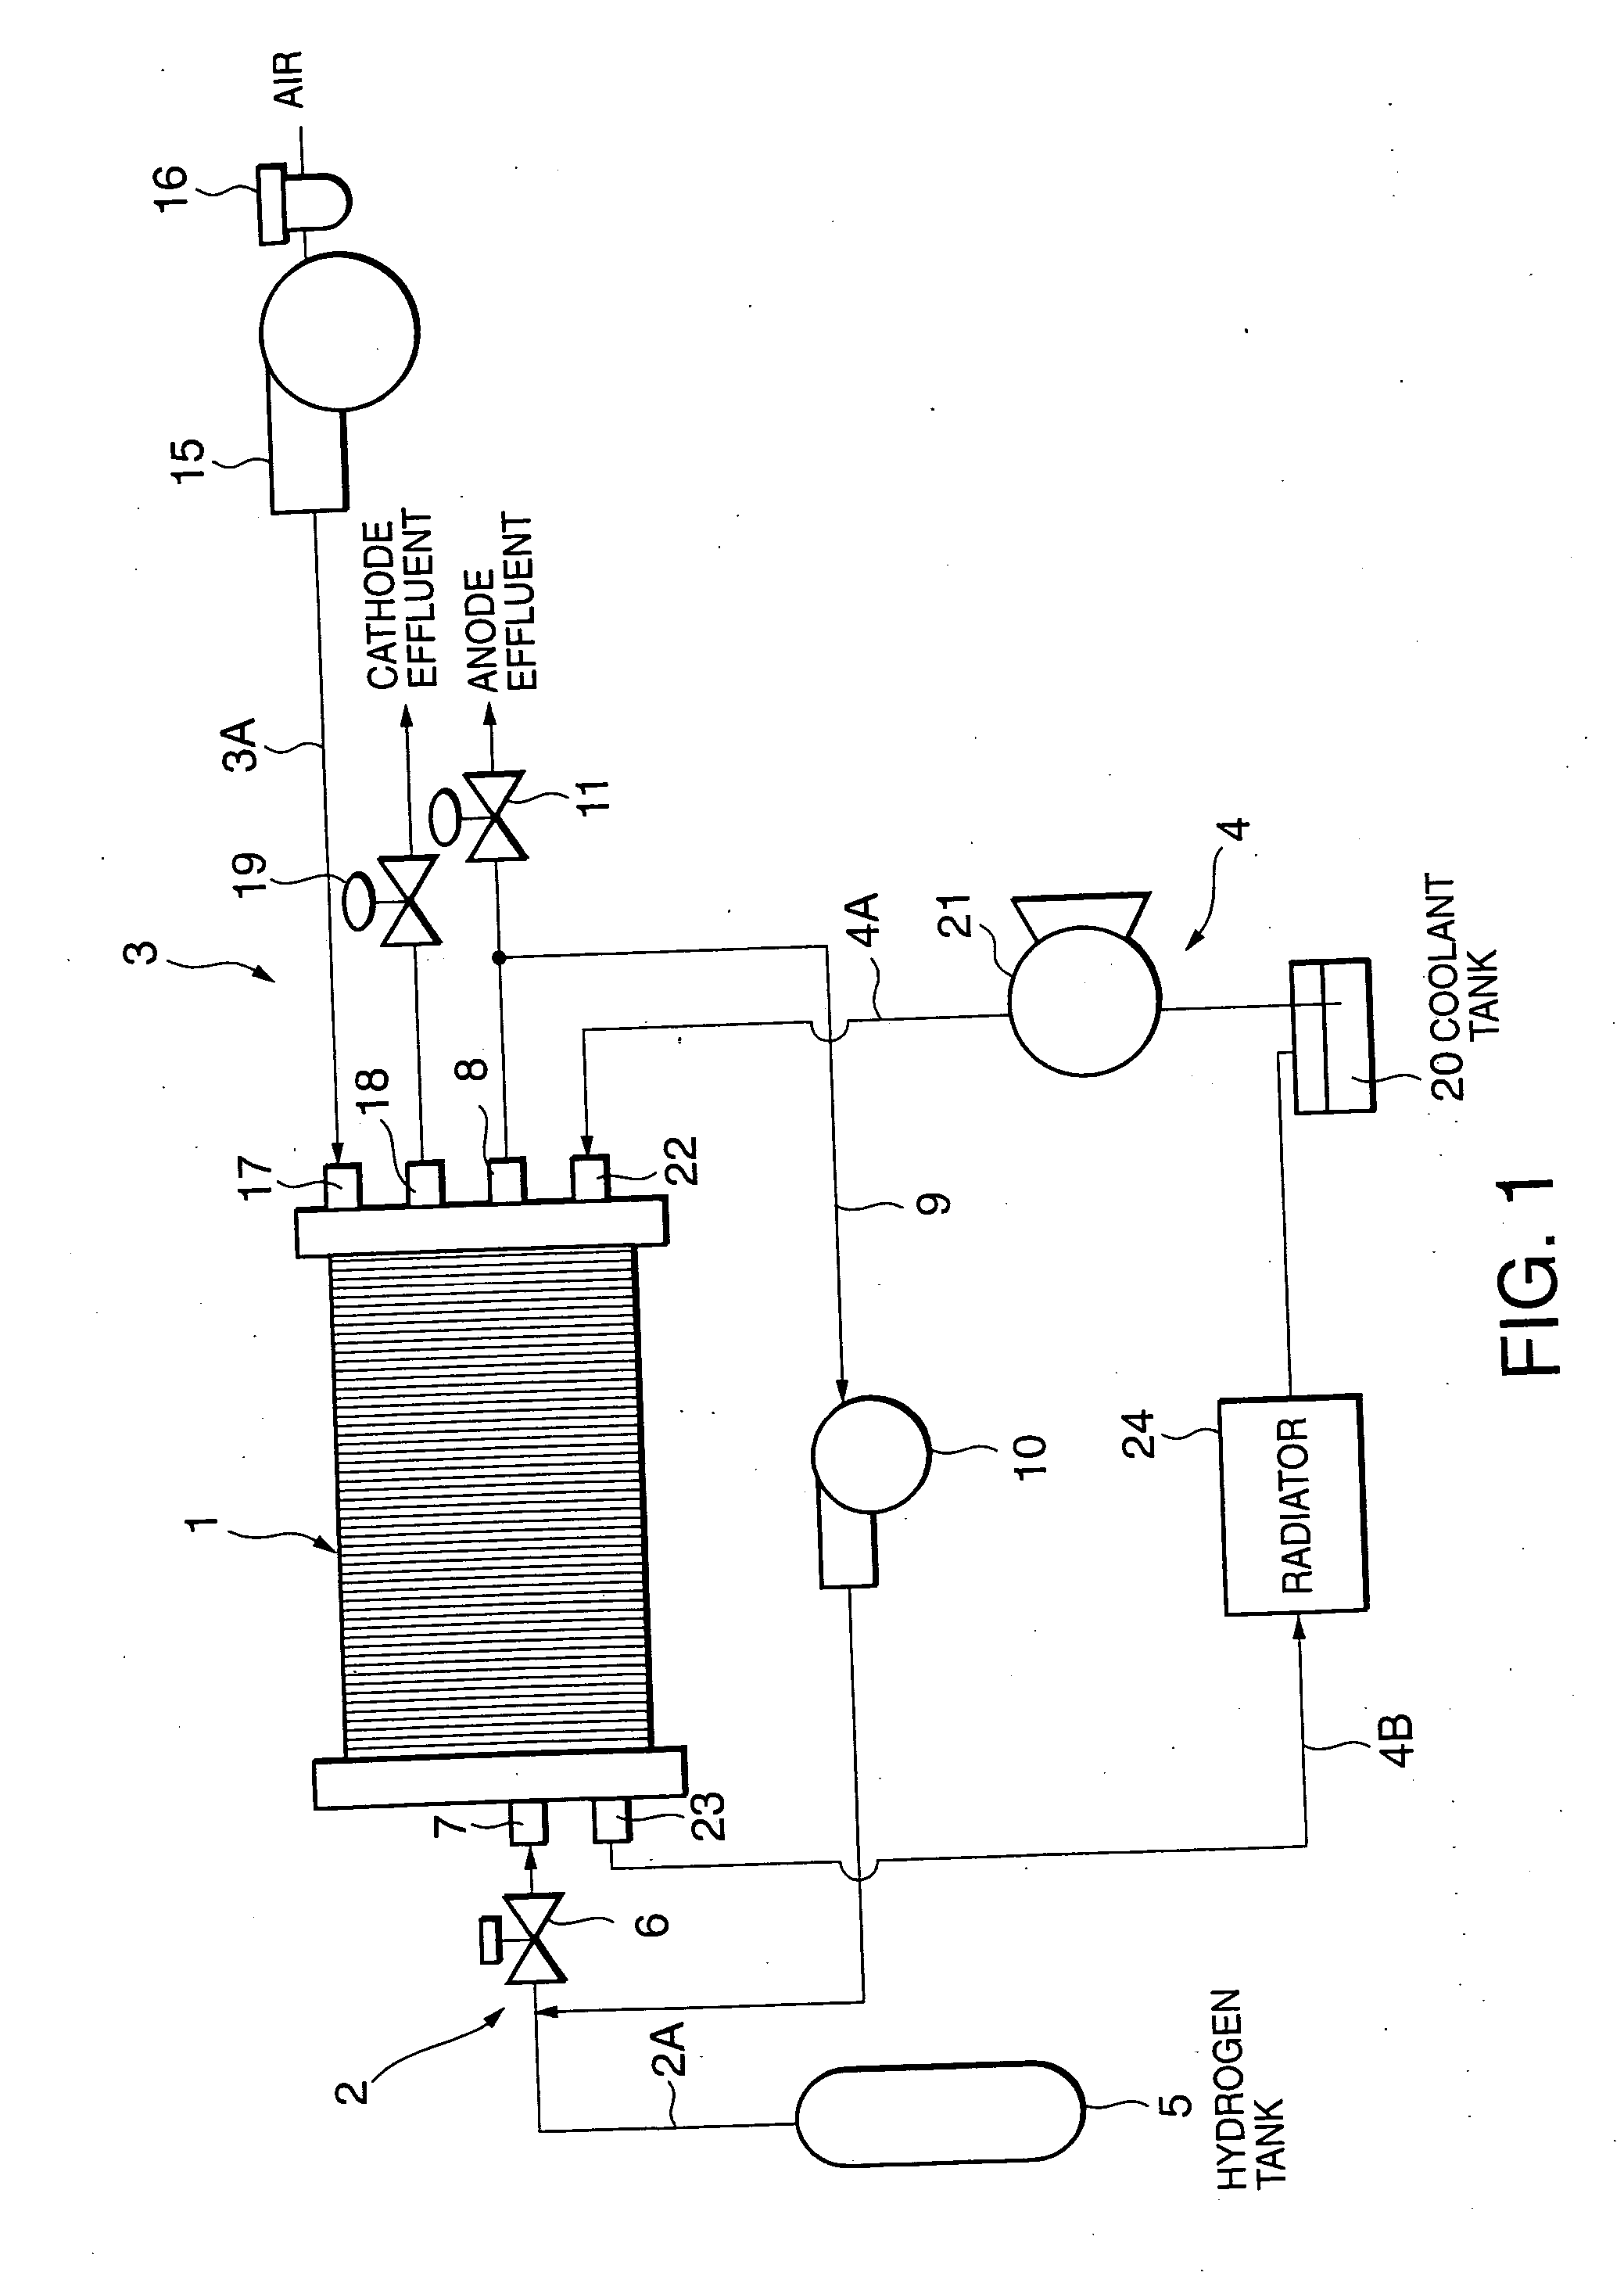 Polymer electrolyte fuel cell and power generation device